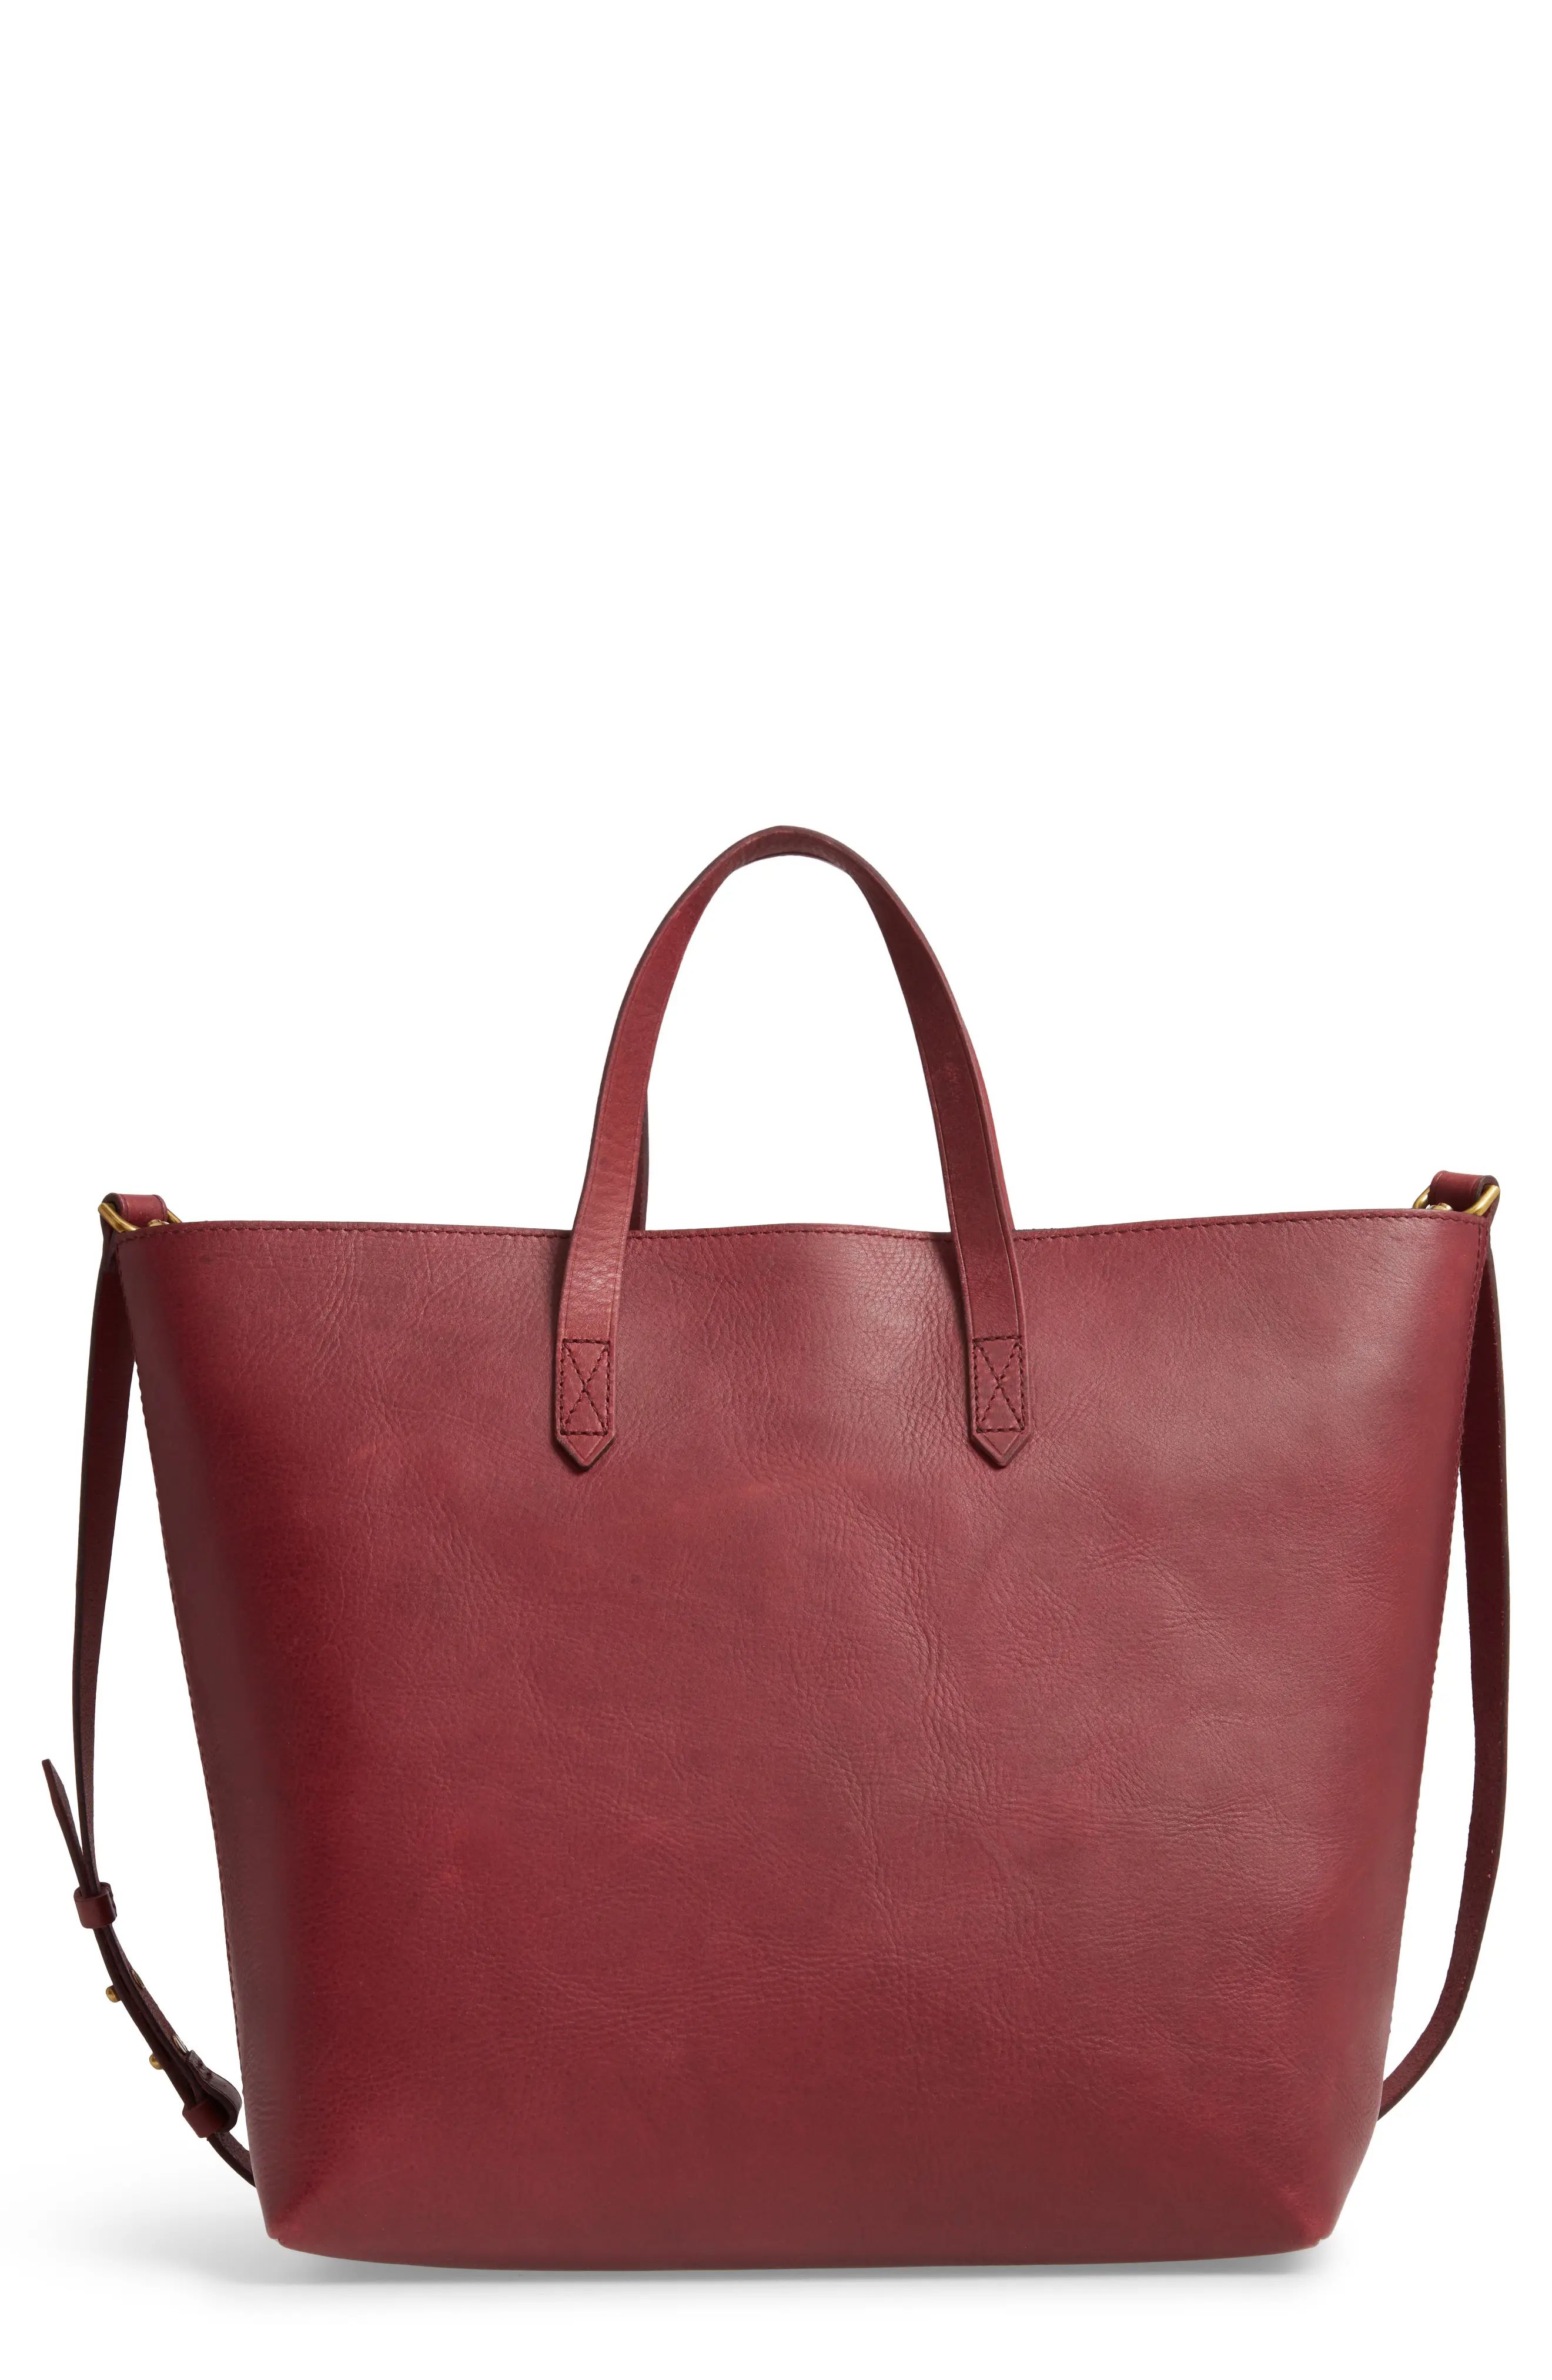 Madewell Zip Top Transport Leather Carryall | Nordstrom